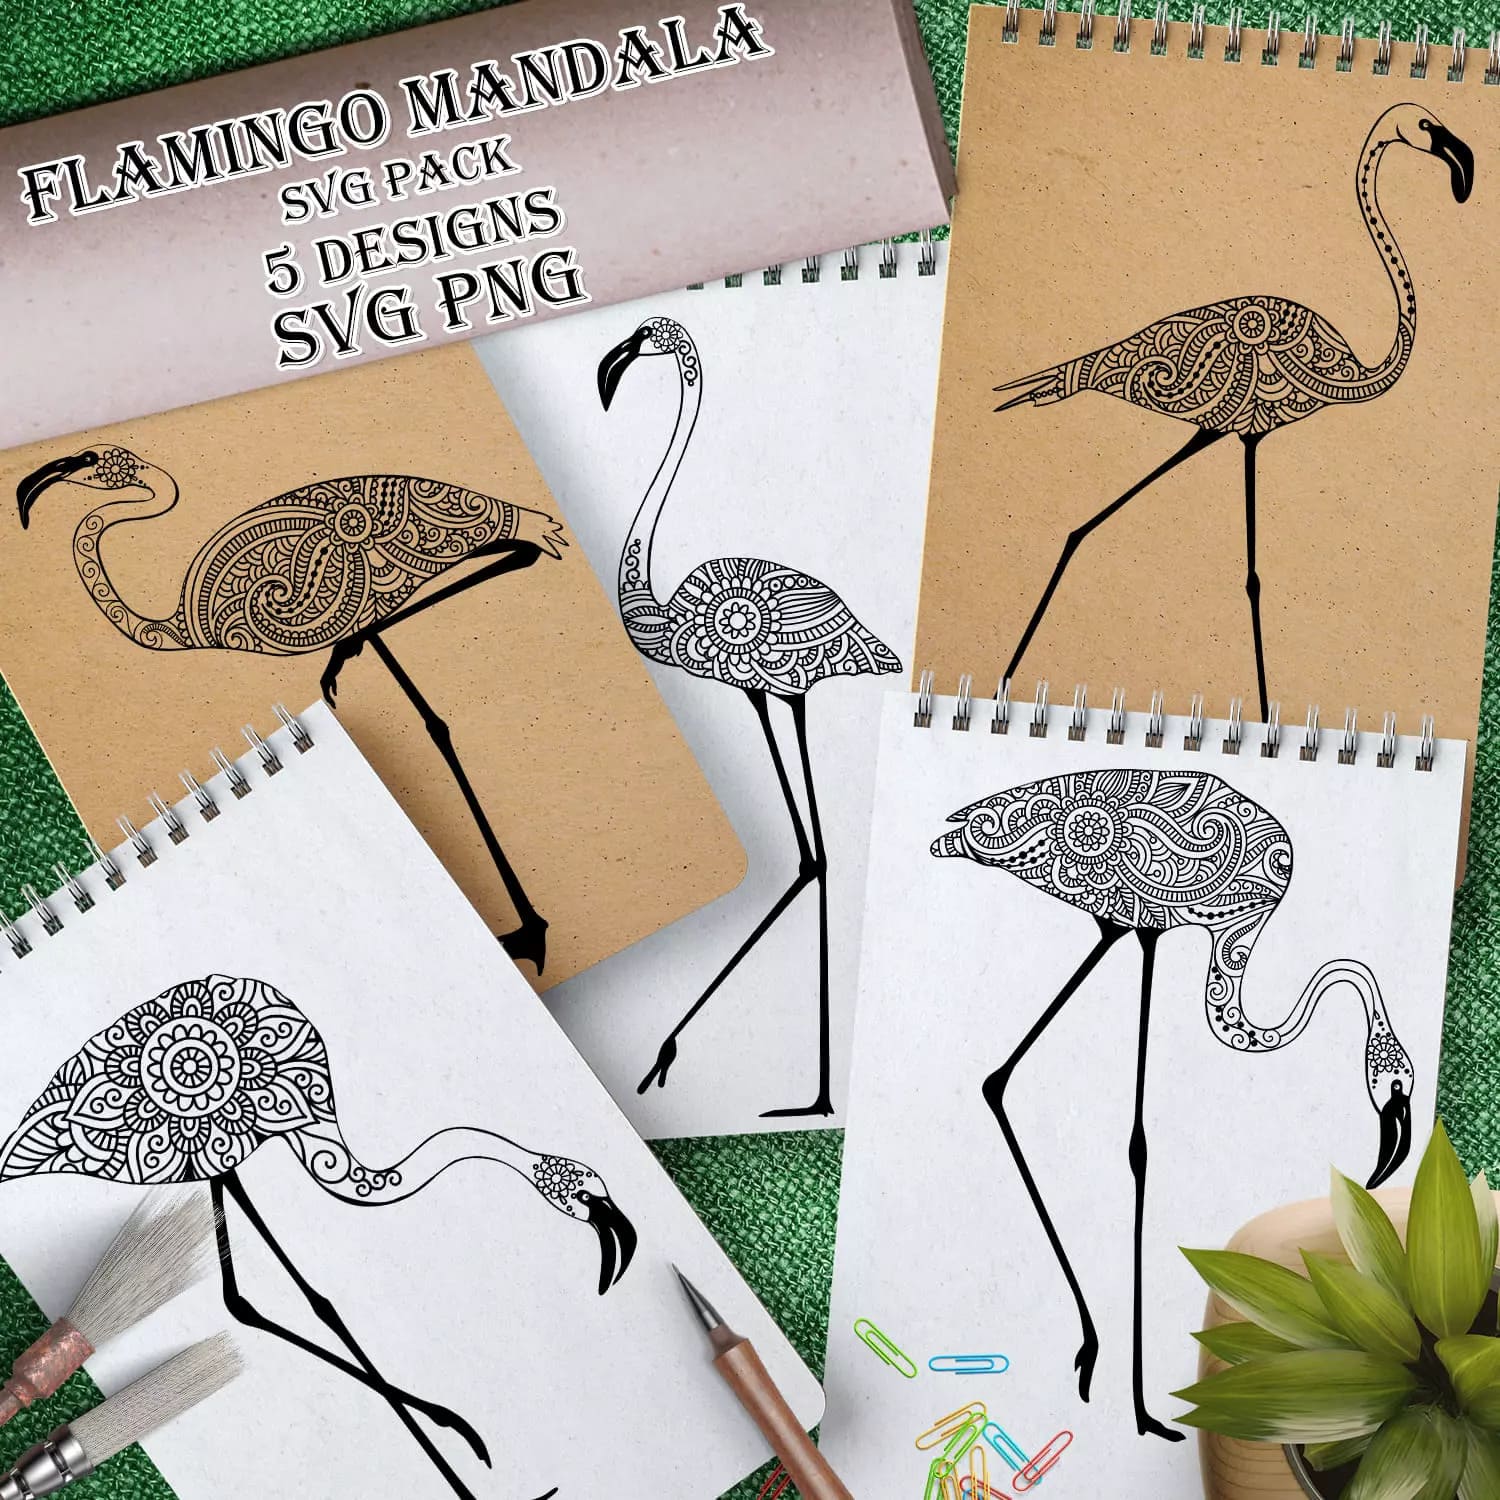 Three notebooks with drawings of flamingos on them.